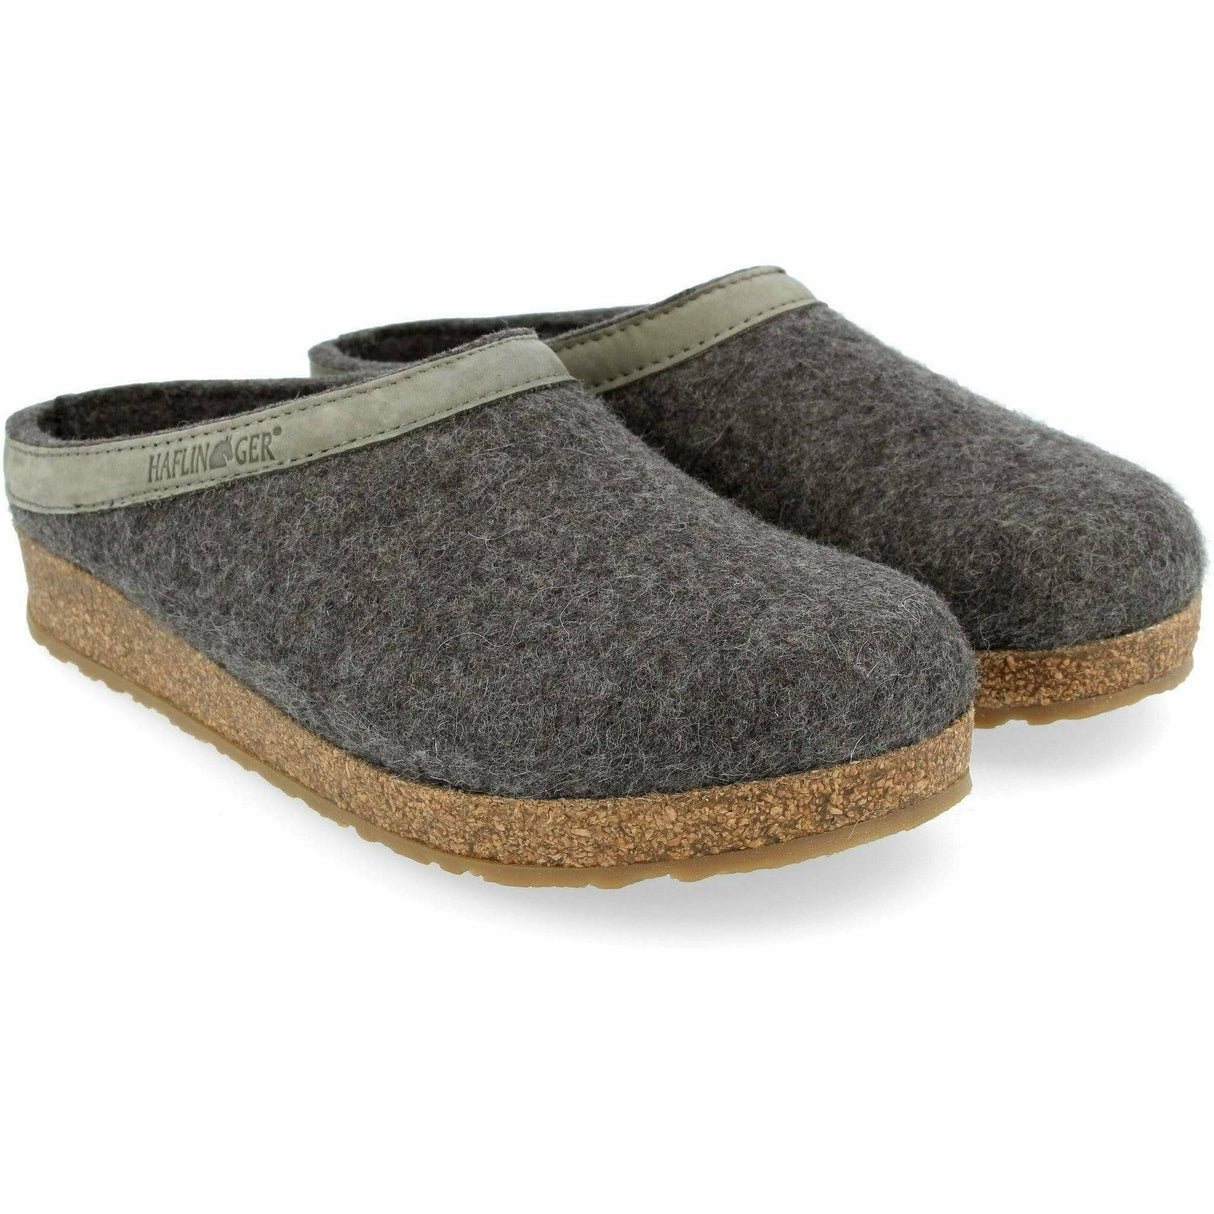 Haflinger GZL Wool Clogs - Clearance  -  37 / Gray